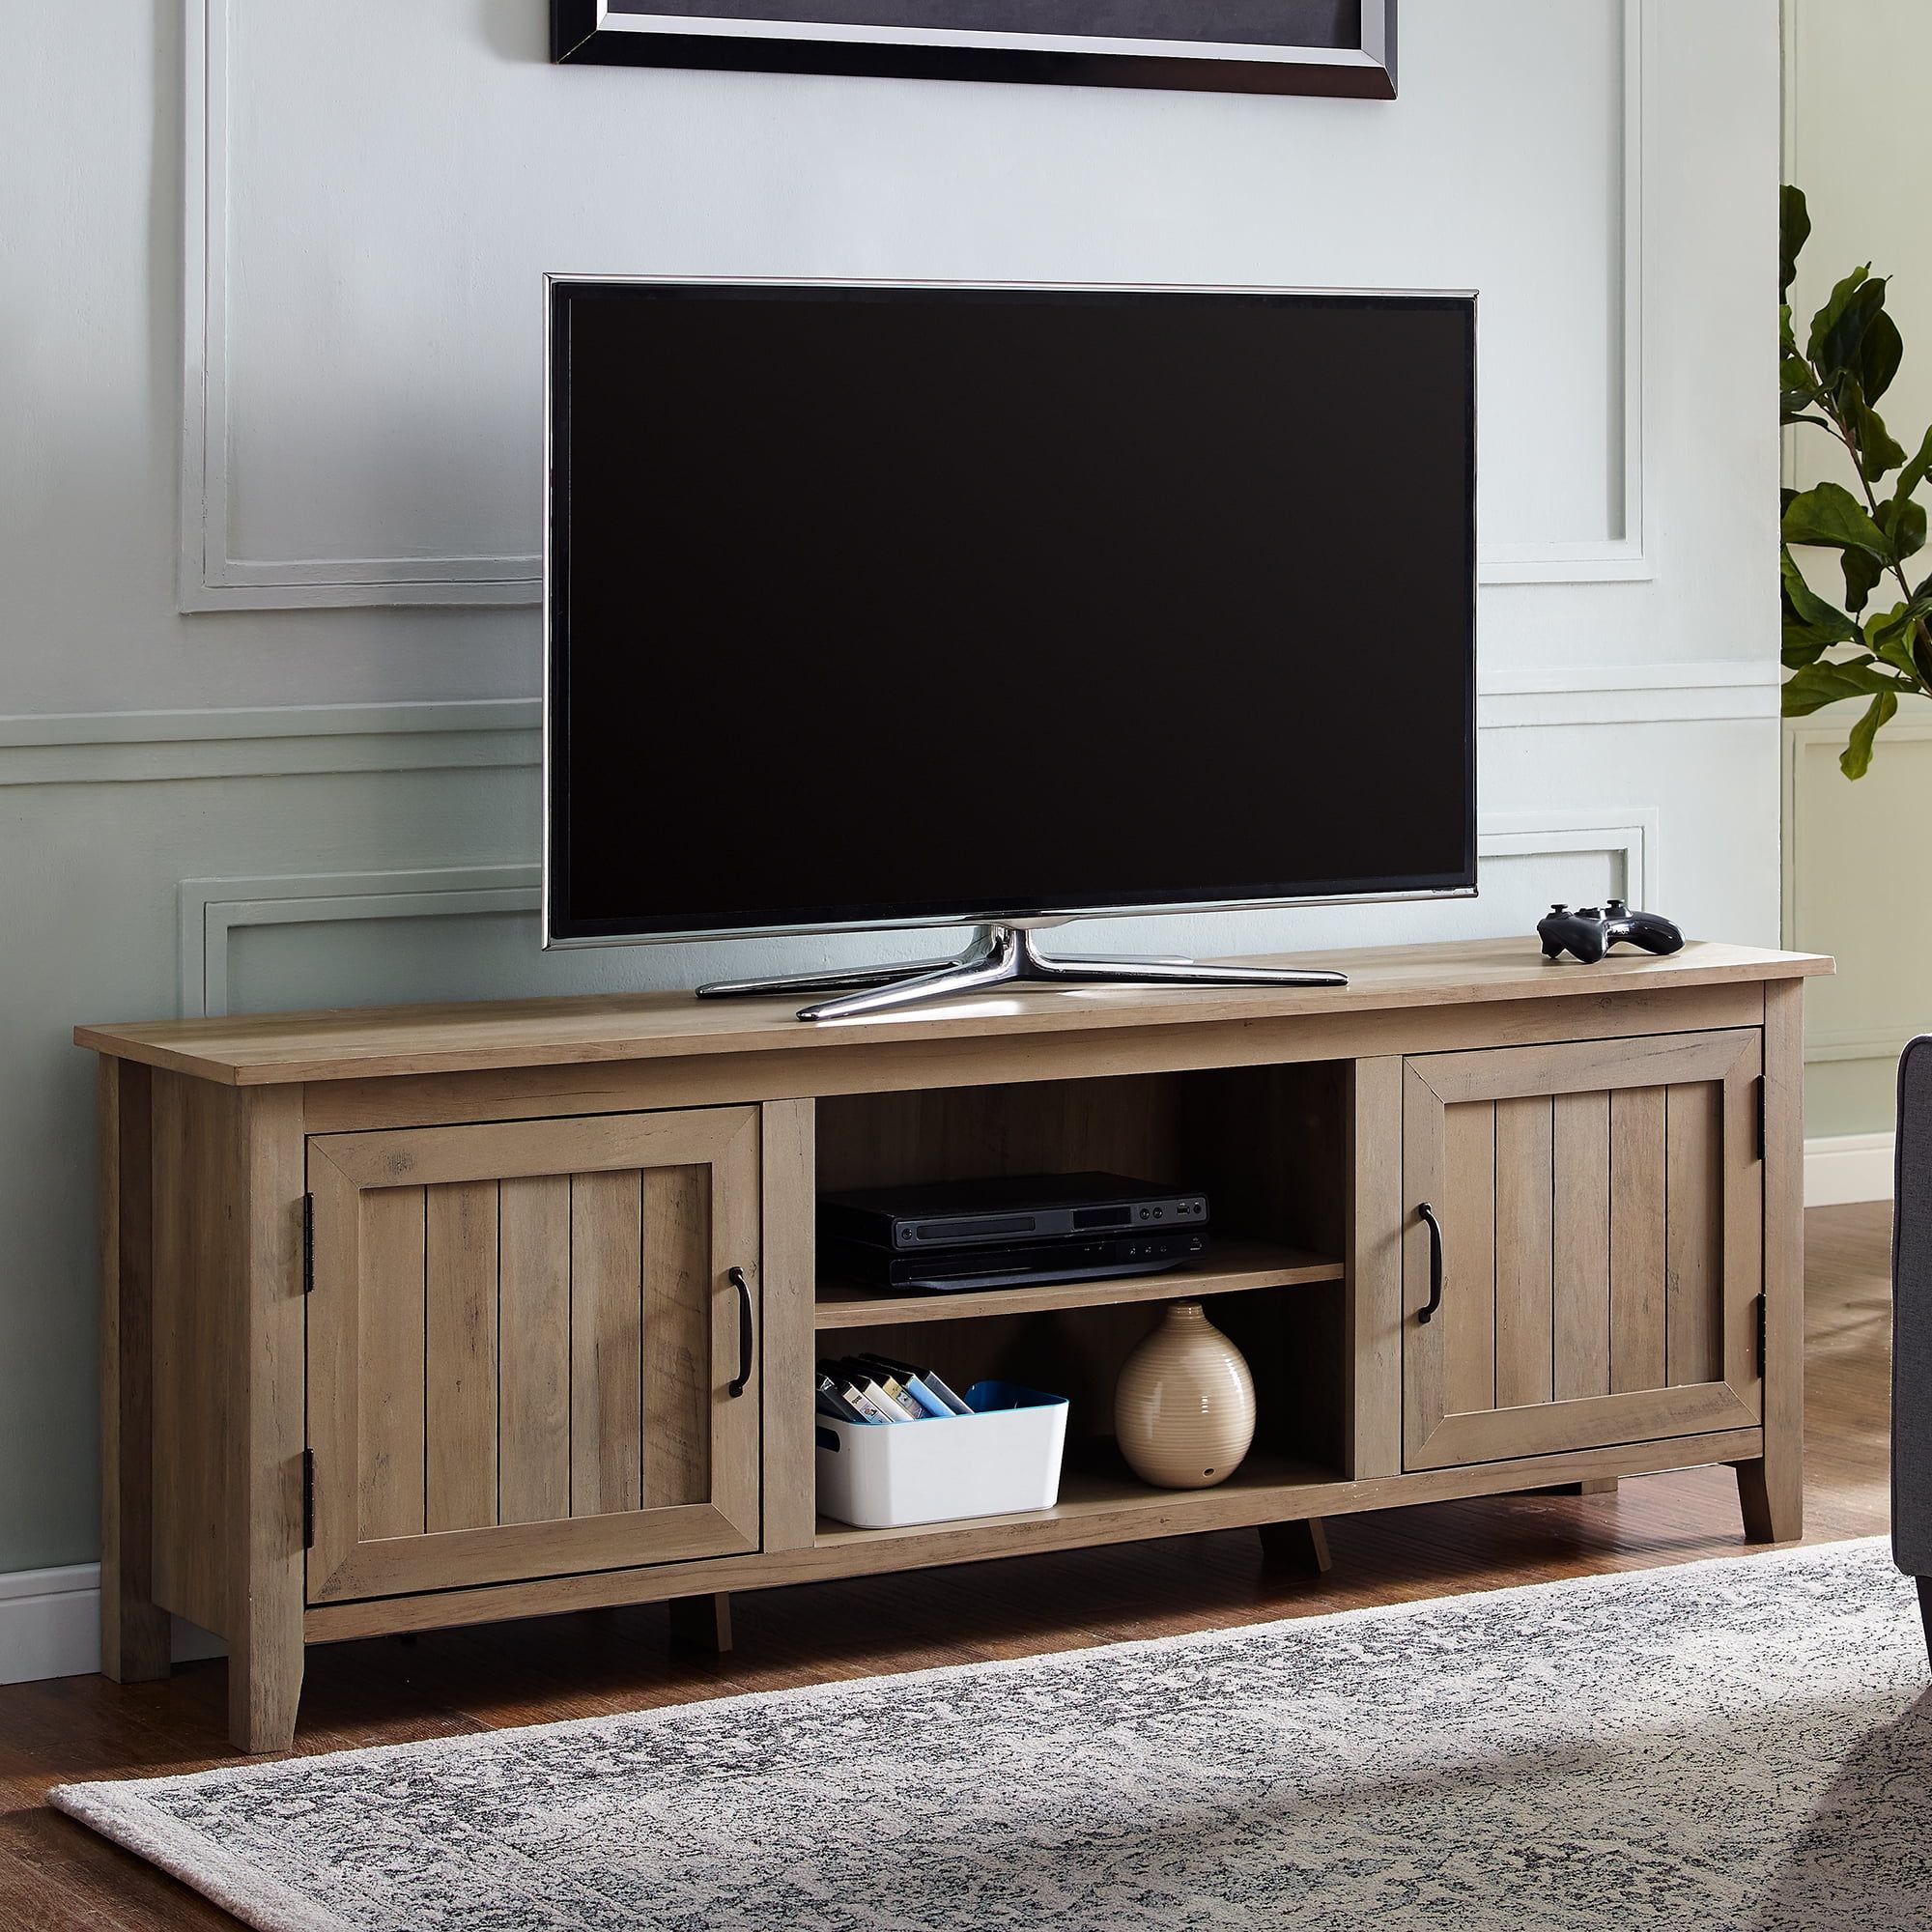 Manor Park Farmhouse Tv Stand For Tvs Up To 80", Reclaimed Barnwood Inside Farmhouse Stands For Tvs (View 10 of 20)